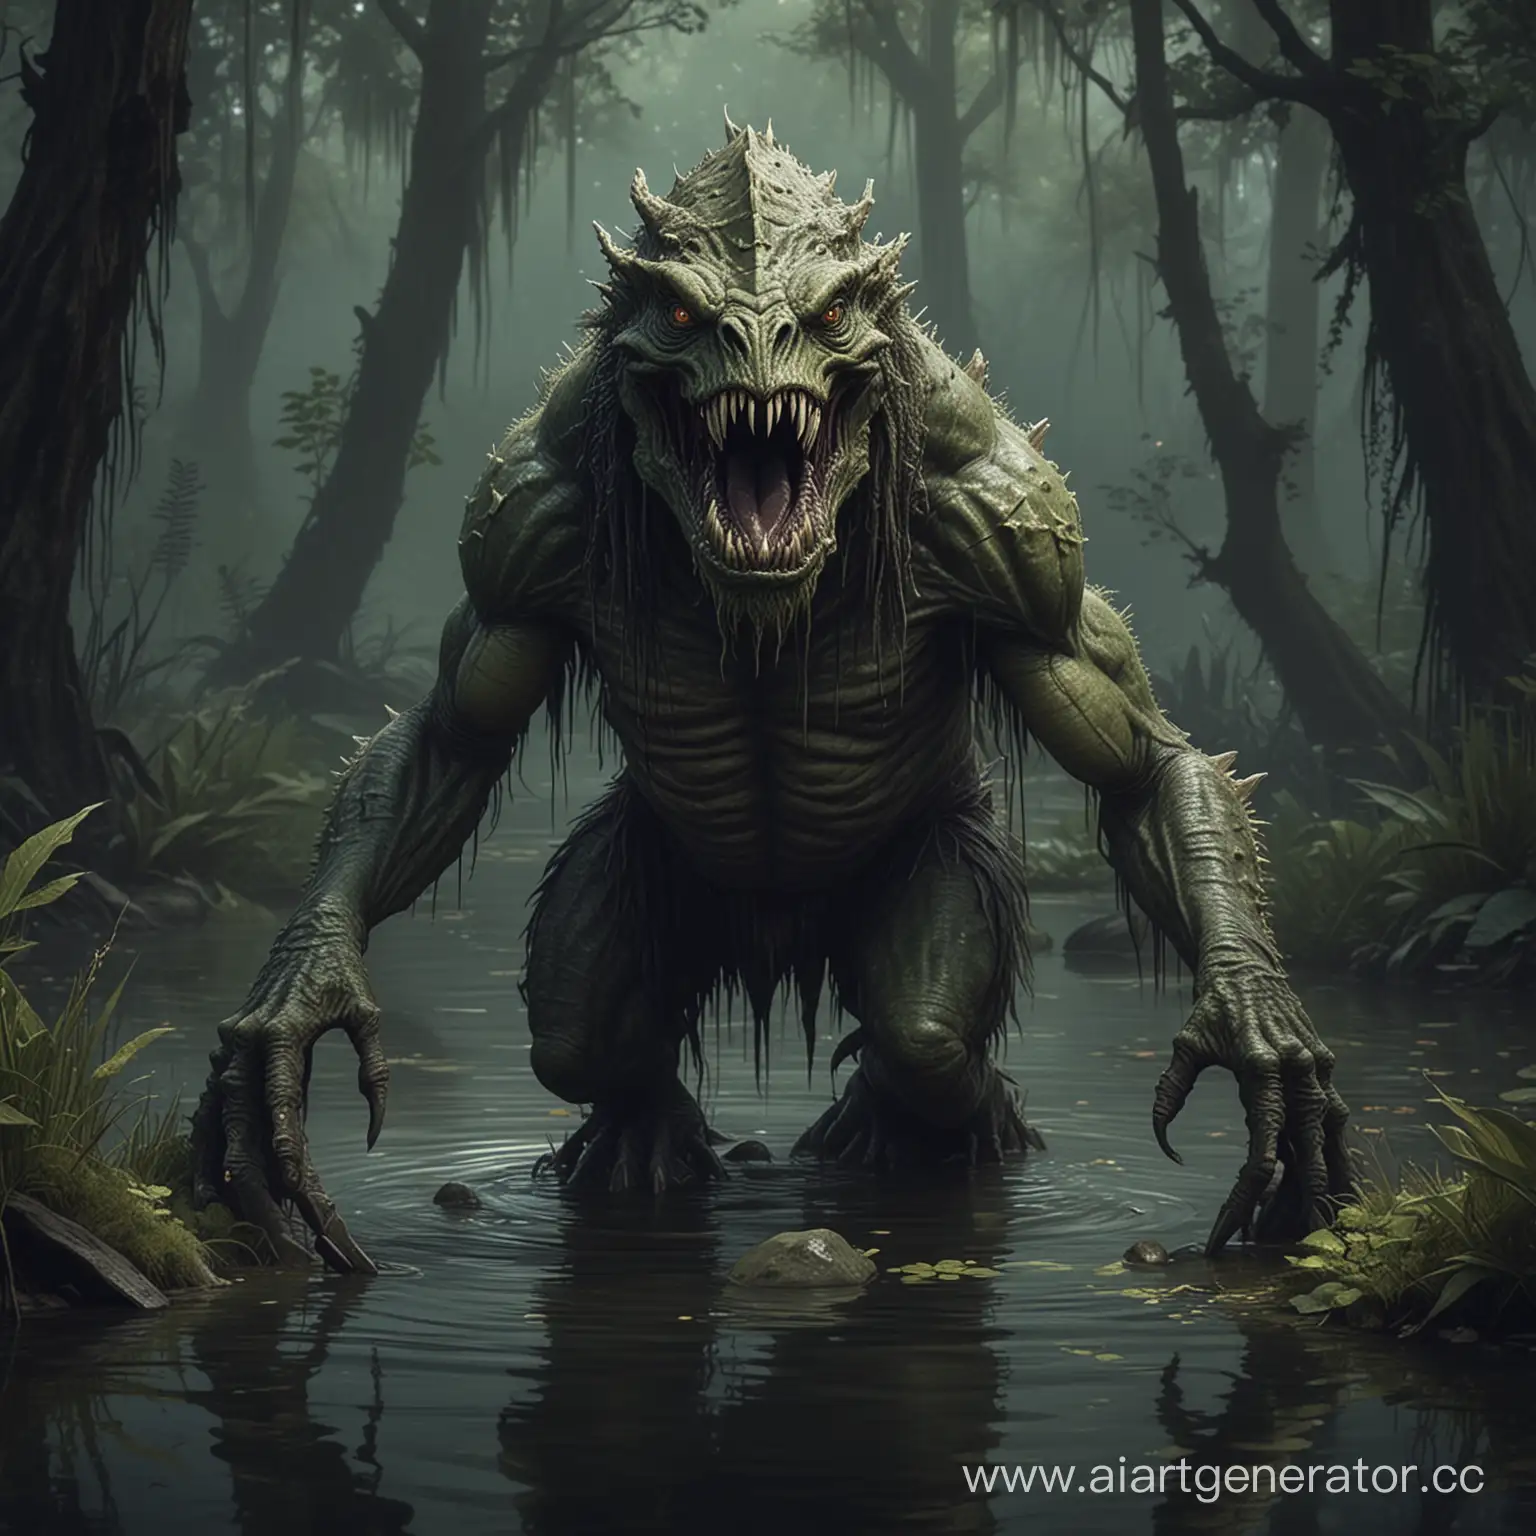 Mysterious-Swamp-Creature-in-Fantasy-Dungeons-Dragons-Style